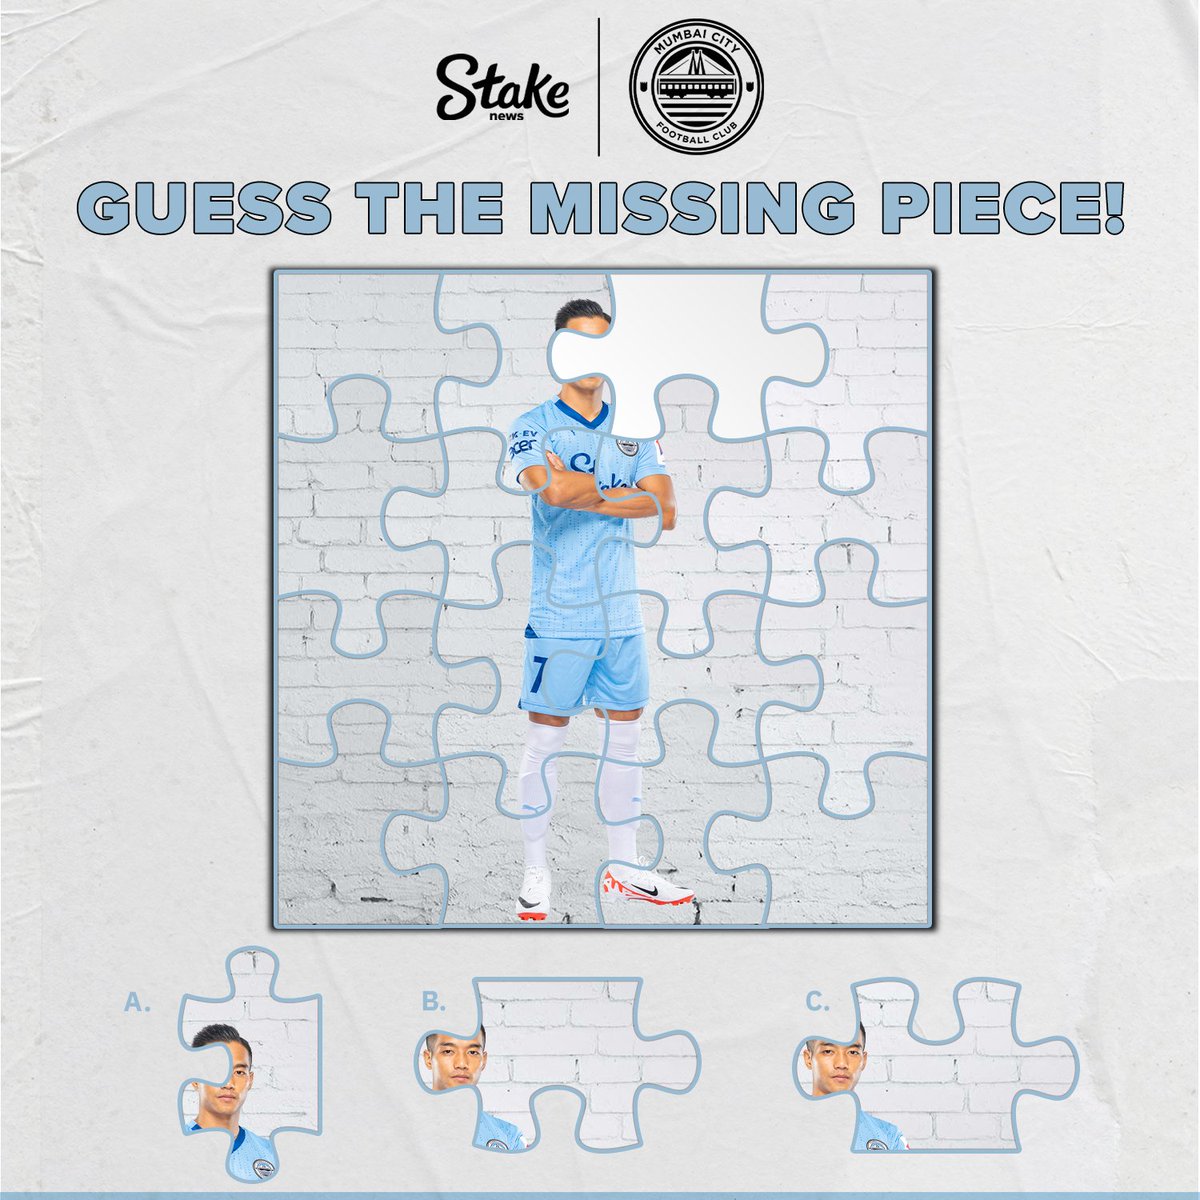 Before Chhangte misses his flight to the #ISLFinal, find the missing piece to see him play in #Kolkata 🩵💪🏻 #MBSGMCFC #AamchiCity #MCFCxStakeNews #MumbaiCity #MCFC #IndianSuperLeague #ISL #ISL10